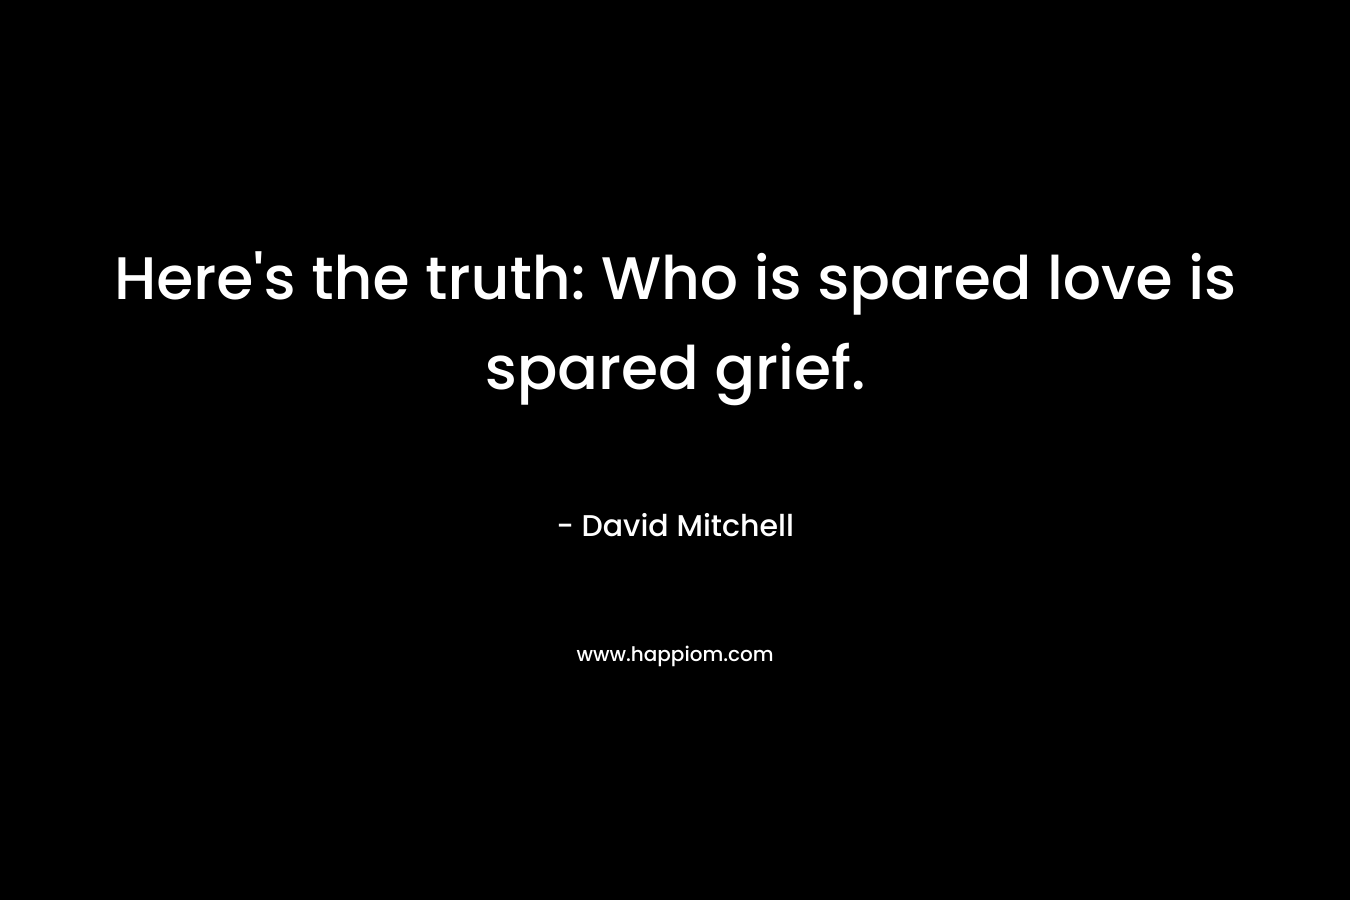 Here's the truth: Who is spared love is spared grief.